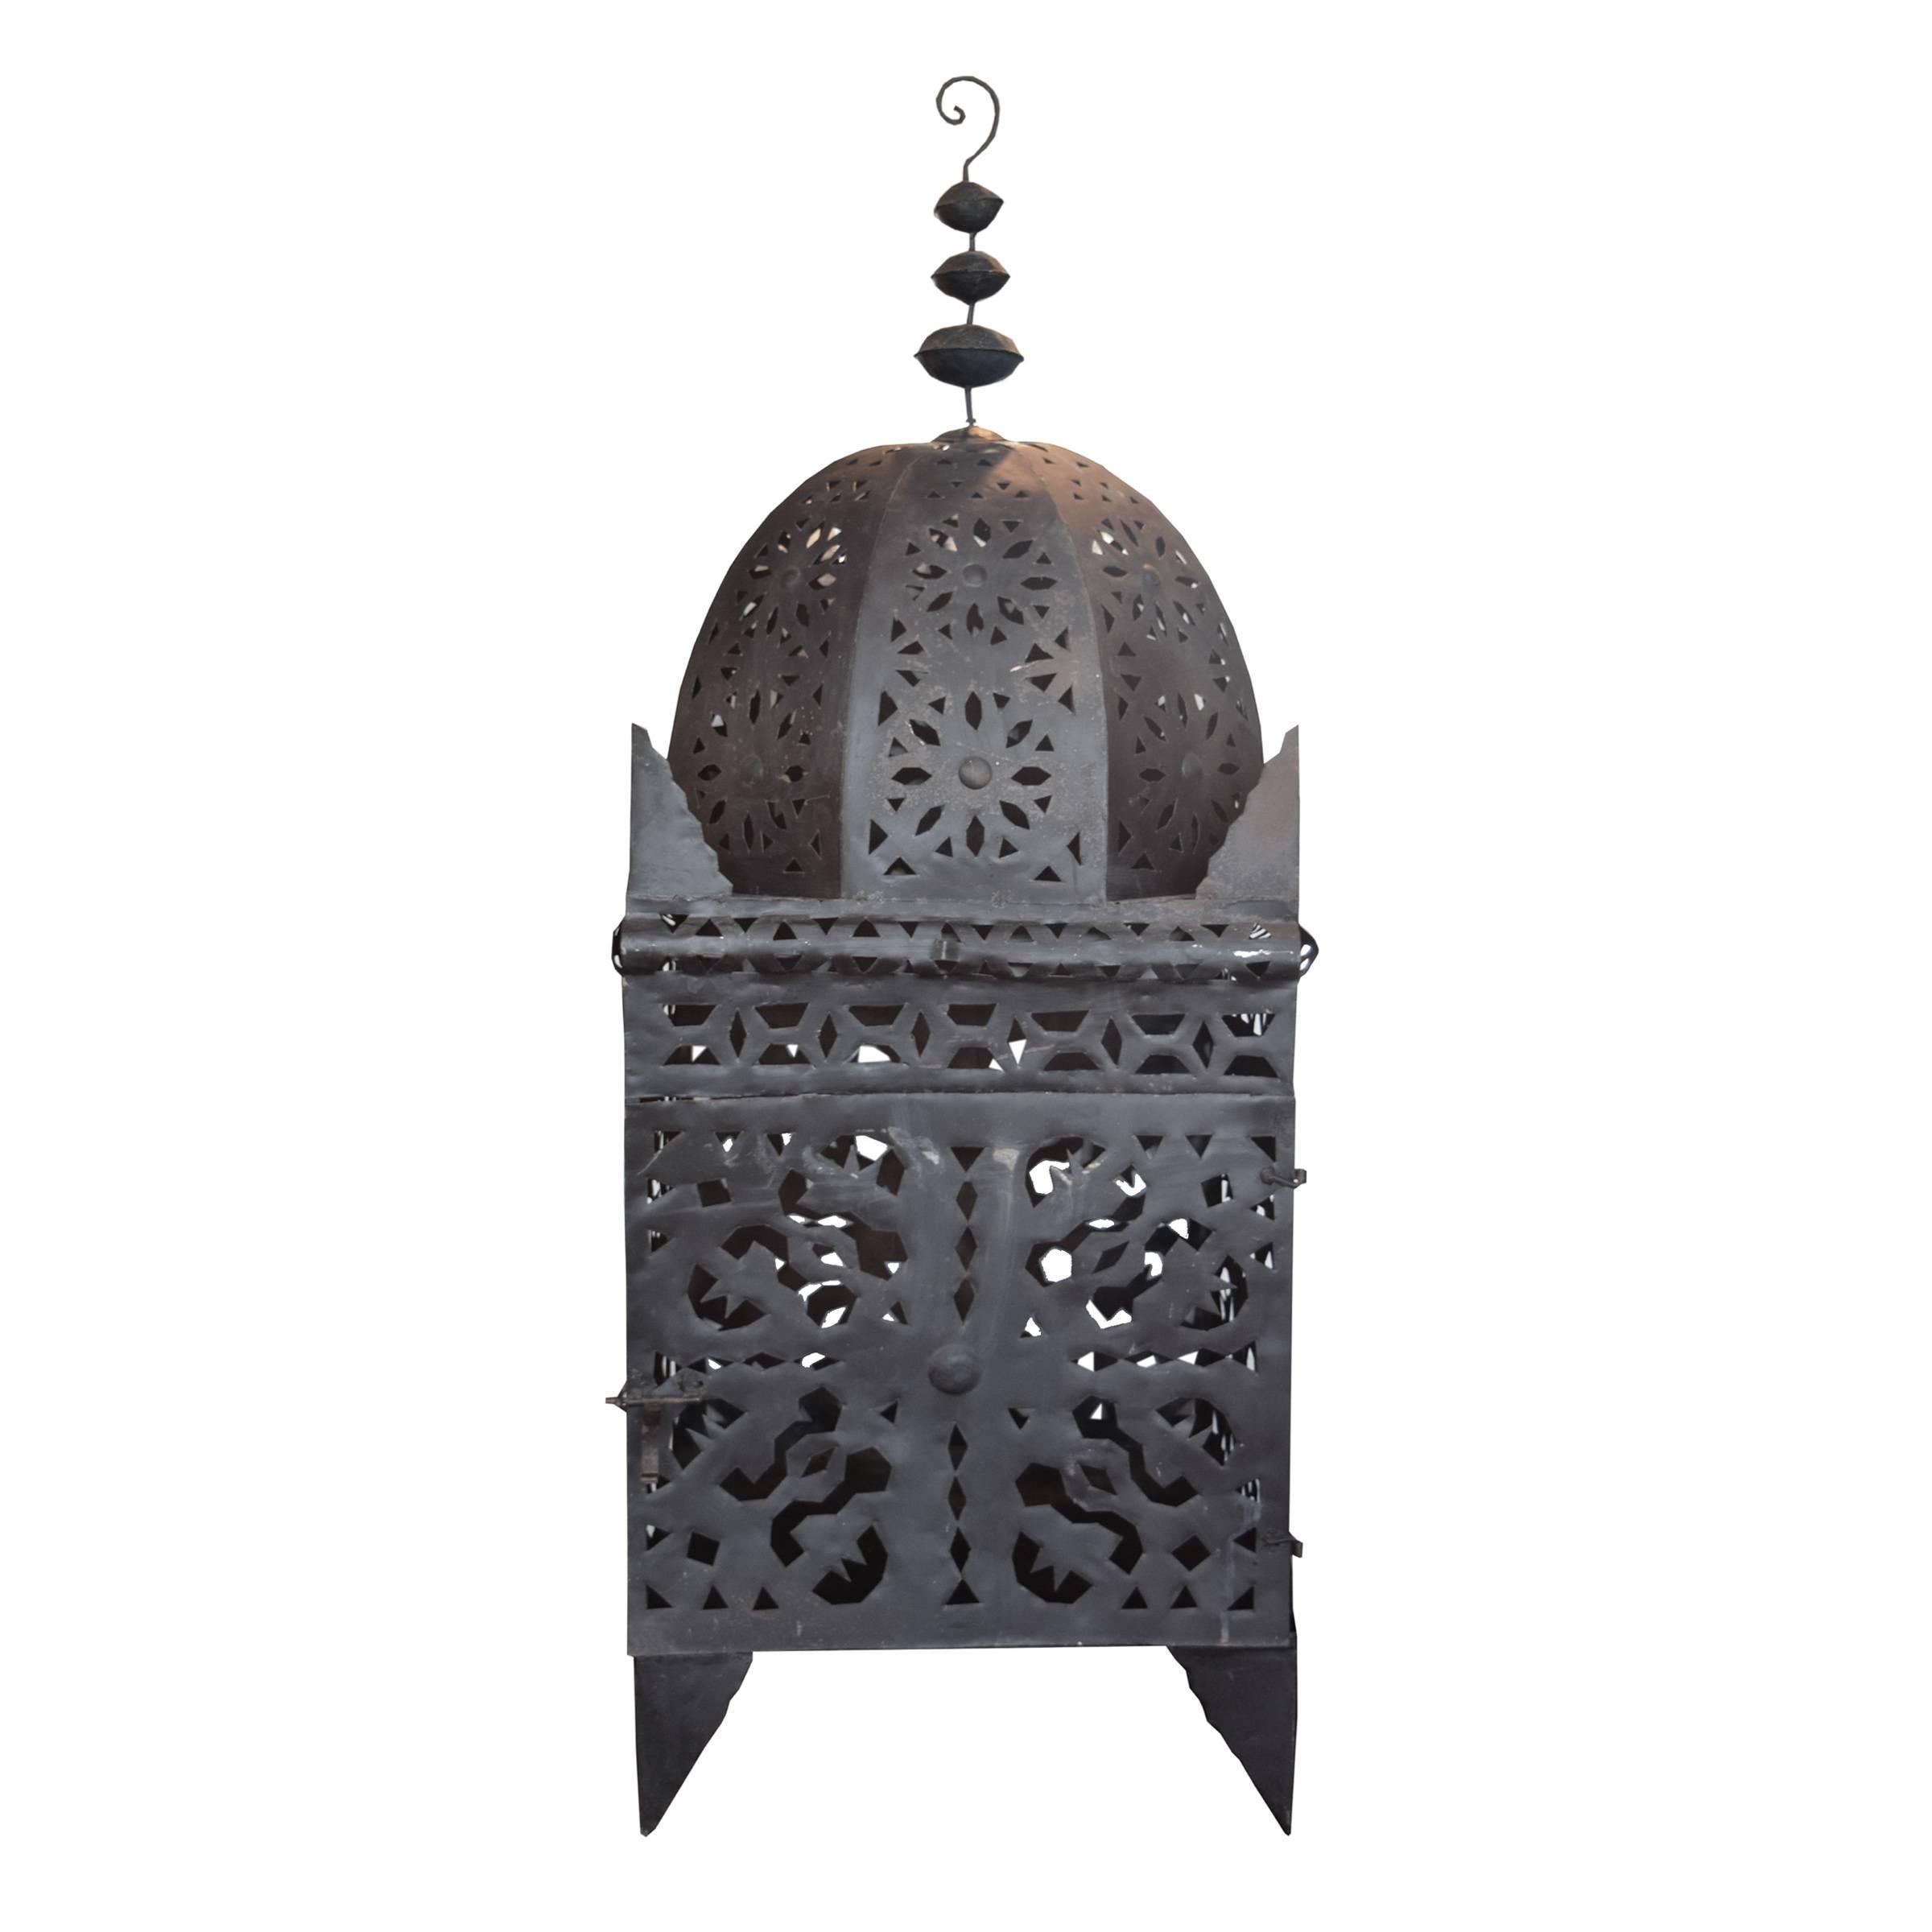 A Moroccan pierced tin Koutoubia style oversize lantern with one hinged door, four legs, intricate pierced detail from top to bottom and a scrolled hook, circa 1960. Two available.